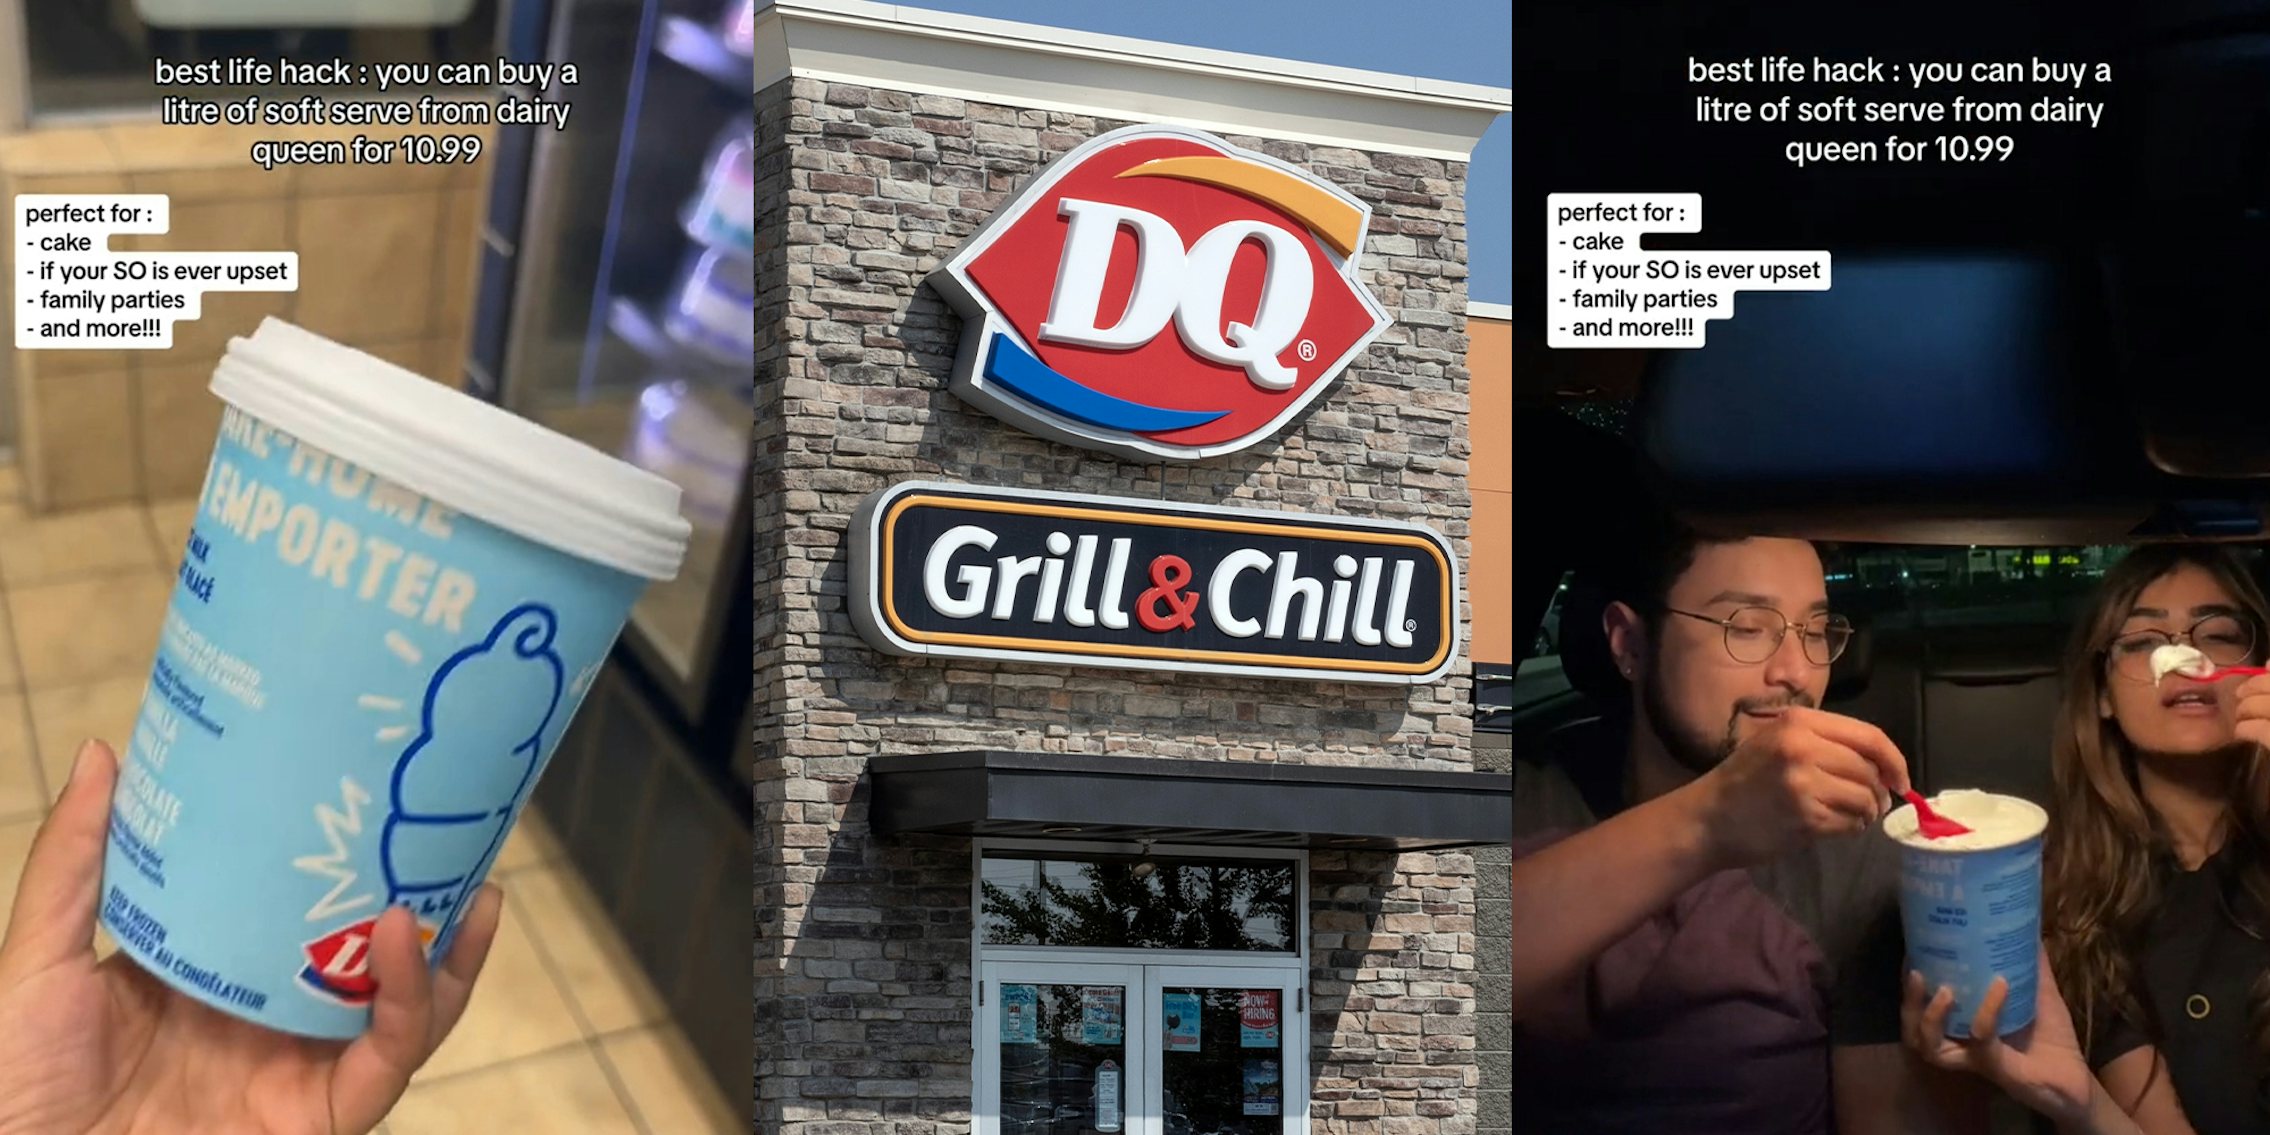 Dairy Queen customer orders 1 liter of soft serve ice cream for $10.99.